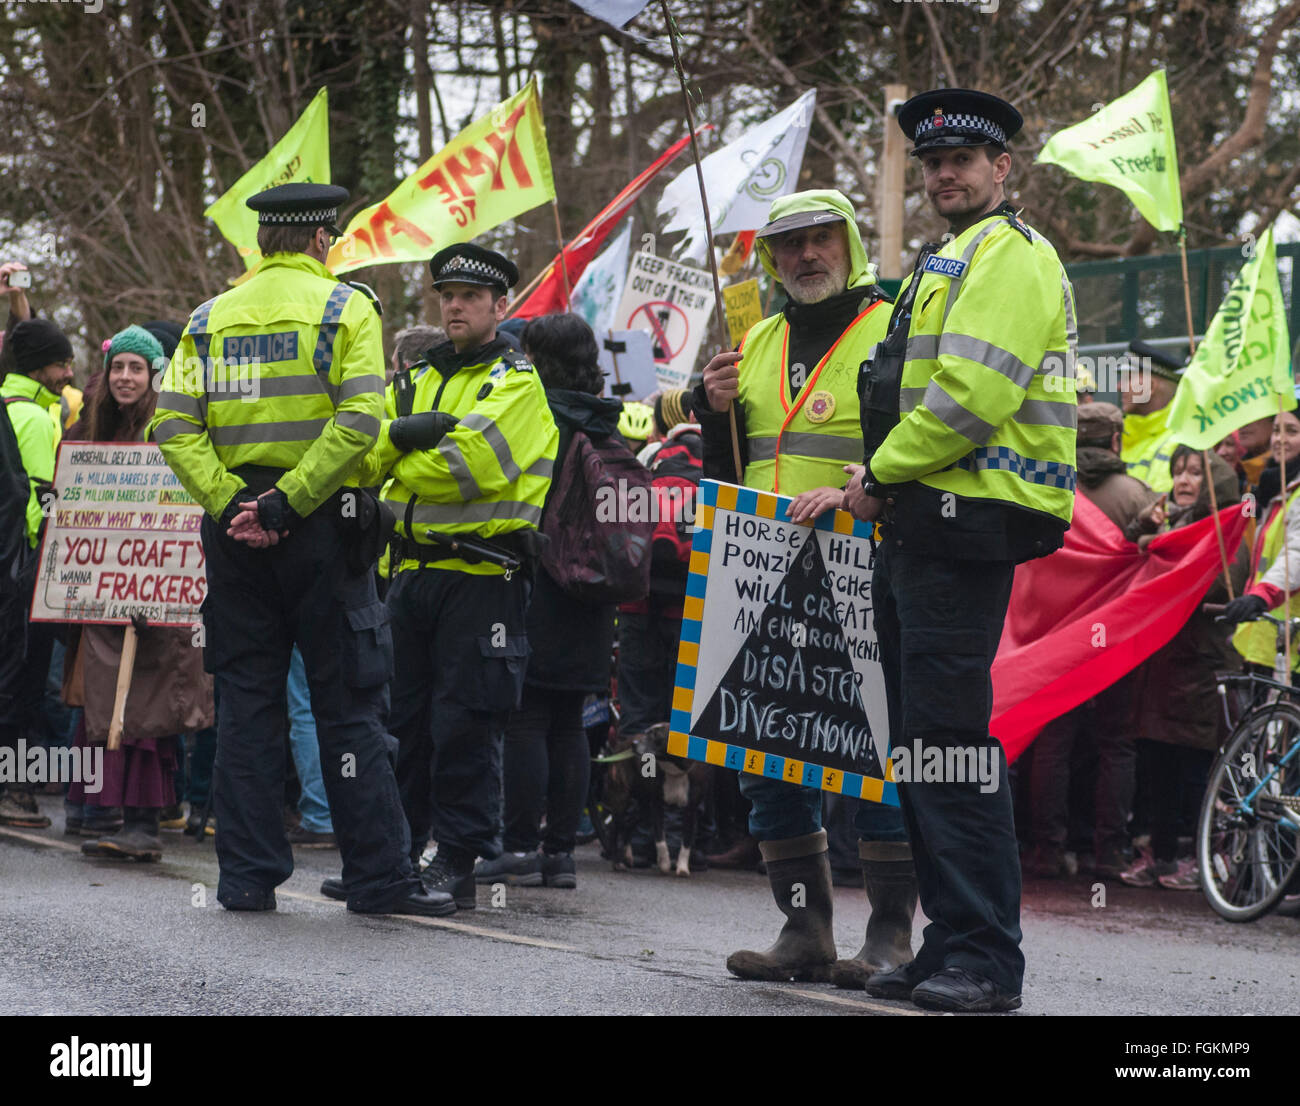 Horse Hill, Surrey, UK.20 Feb 2016.Solidarity Walk & Cycle Ride arrives at Oil Exploration site. UKOG has advised that Fracking is not required but environmentalists suspect otherwise.. Stock Photo